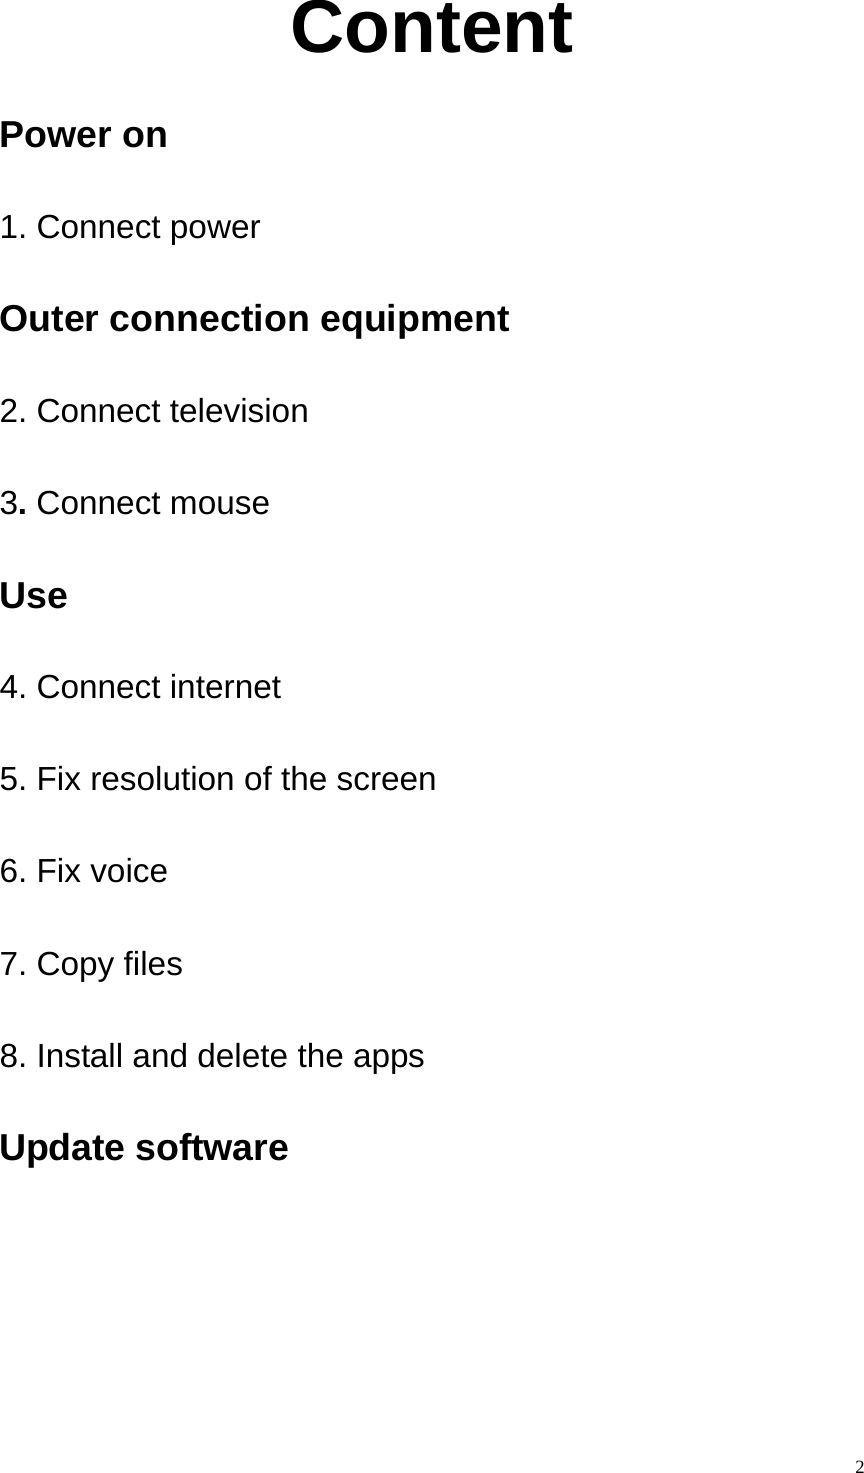    2Content Power on 1. Connect power   Outer connection equipment 2. Connect television     3. Connect mouse   Use   4. Connect internet   5. Fix resolution of the screen 6. Fix voice   7. Copy files 8. Install and delete the apps Update software  